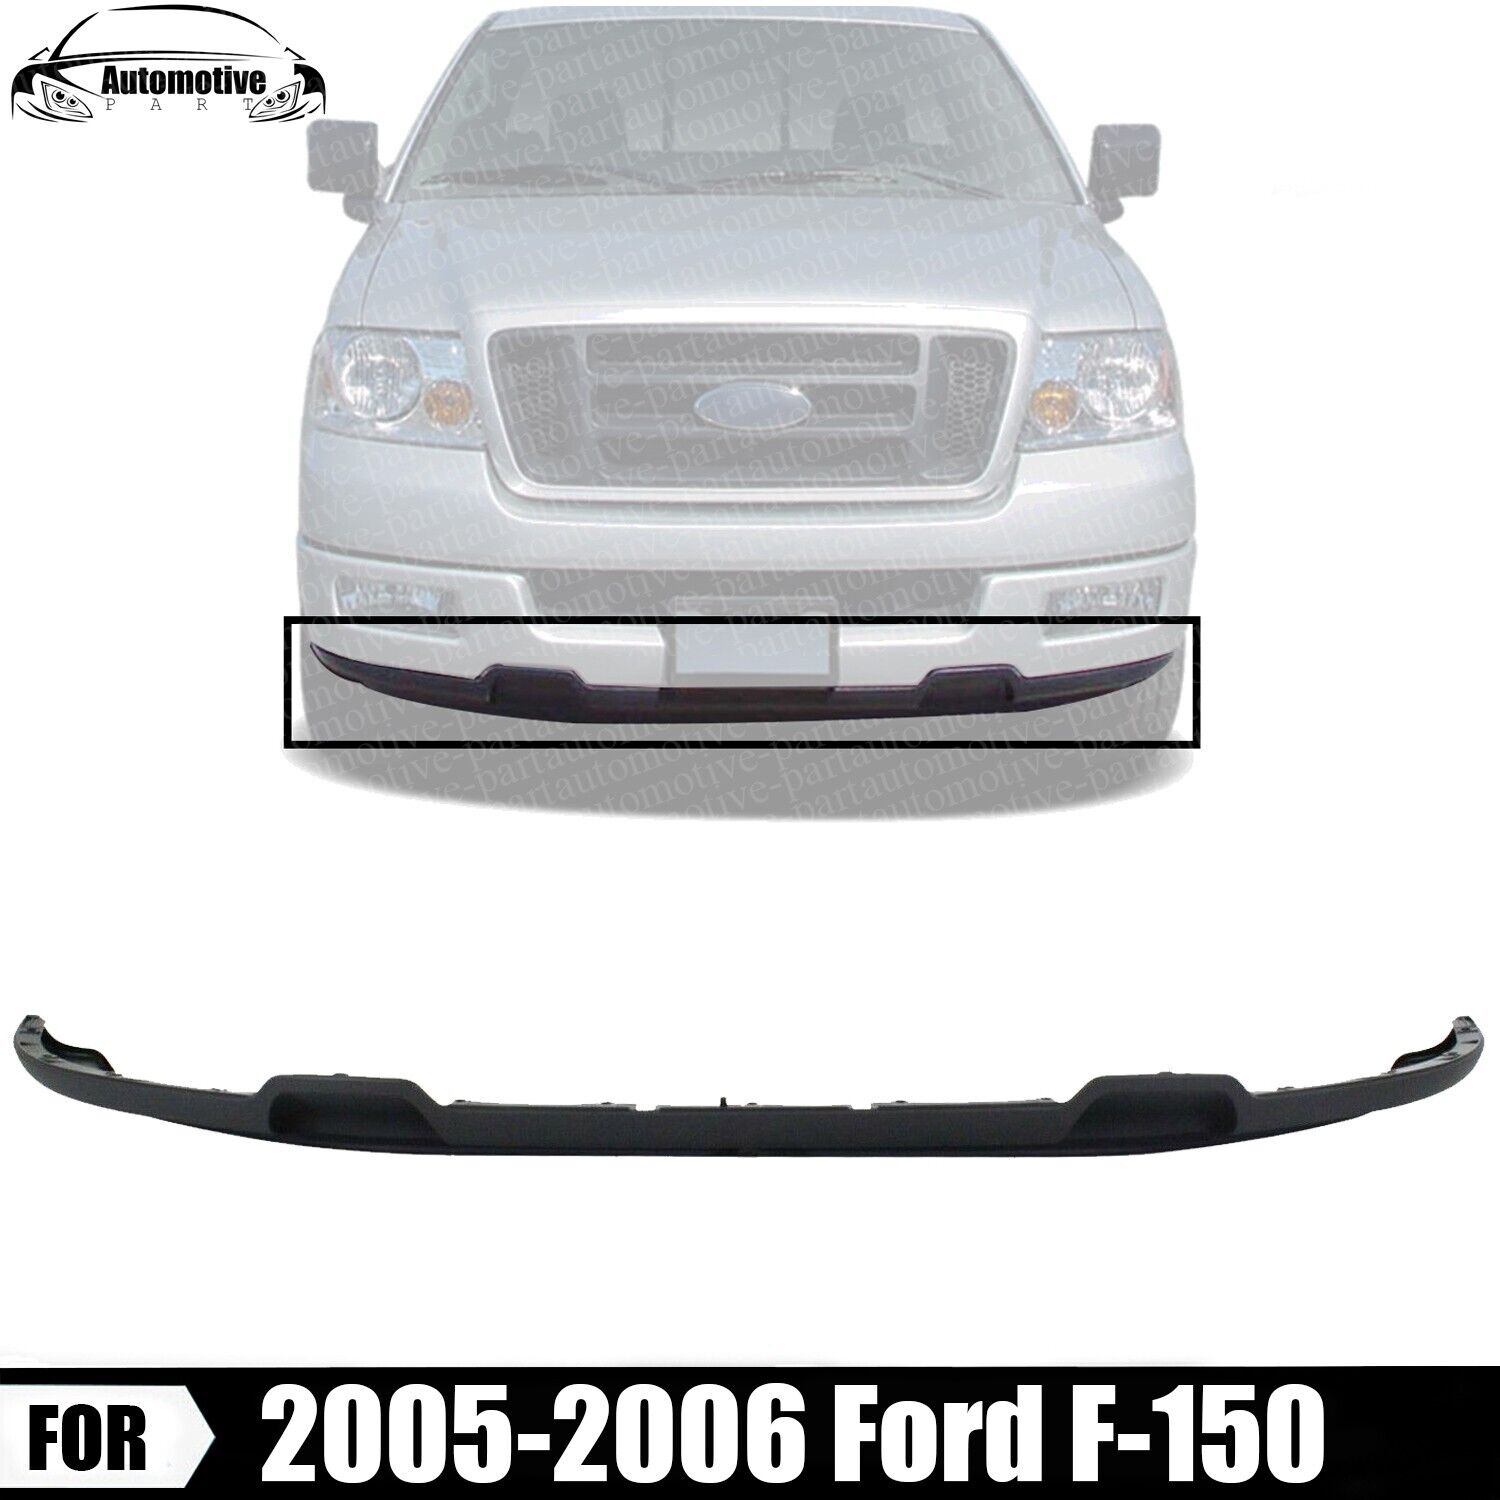 Front Lower Valance Spoiler Air Deflector Textured For 2005-2006 Ford F-150 RWD